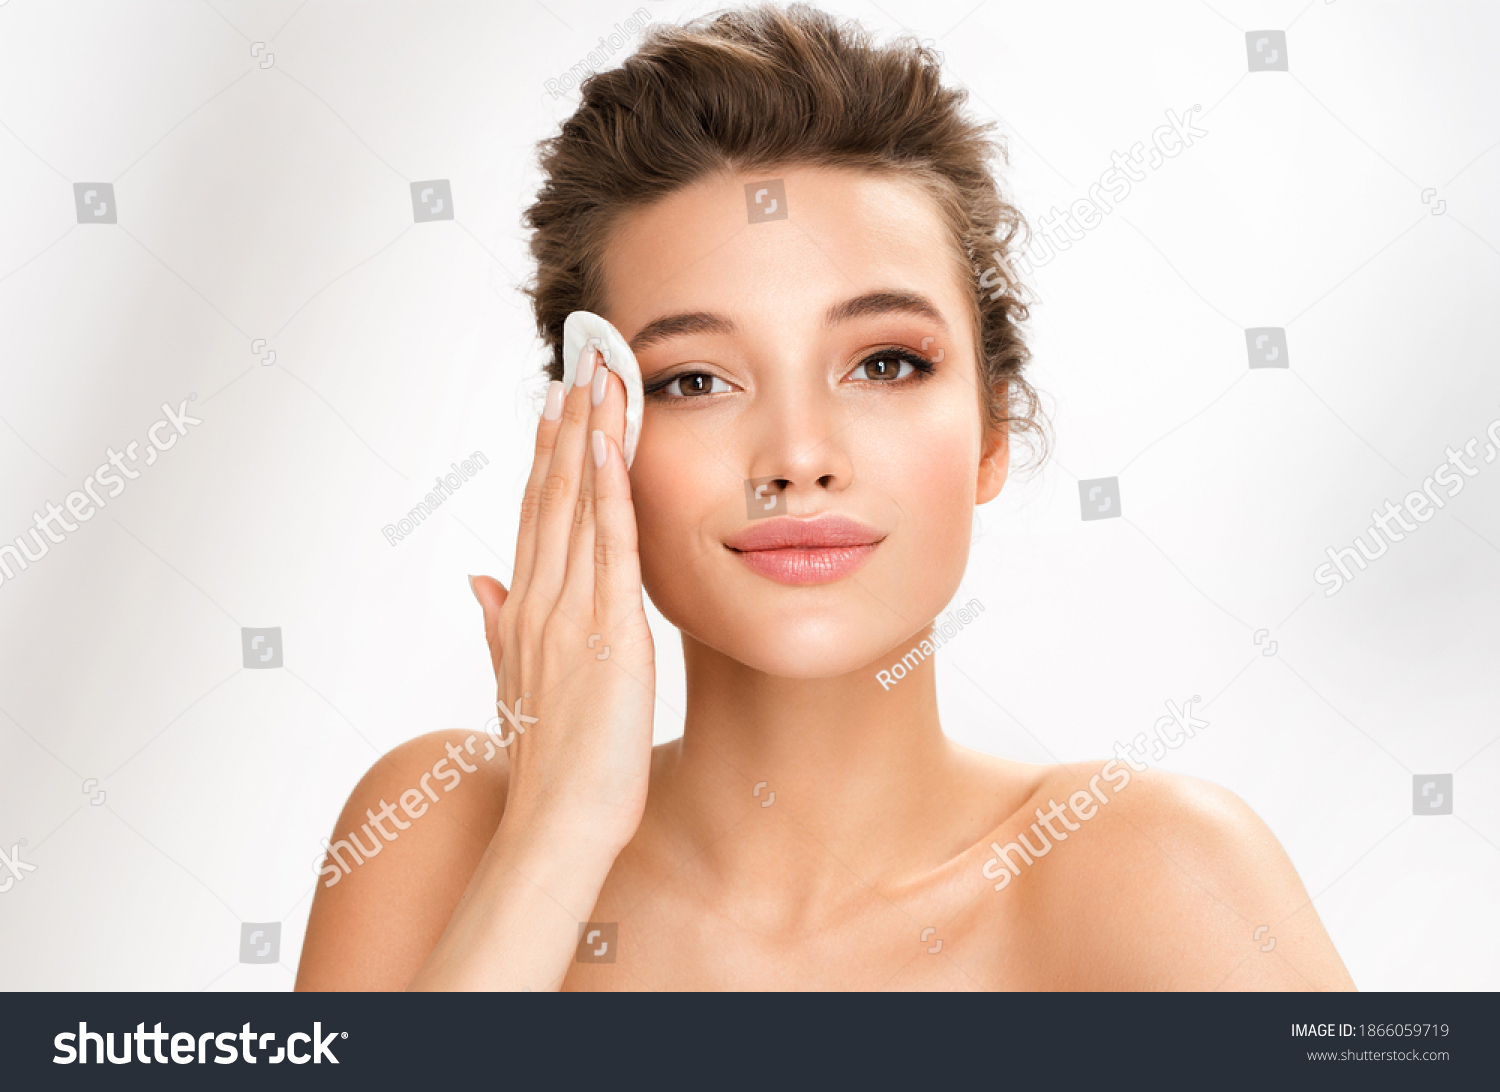 Woman removing makeup, holds cotton pads near face. Photo of woman with perfect skin on white background. Beauty and skin care concept #1866059719